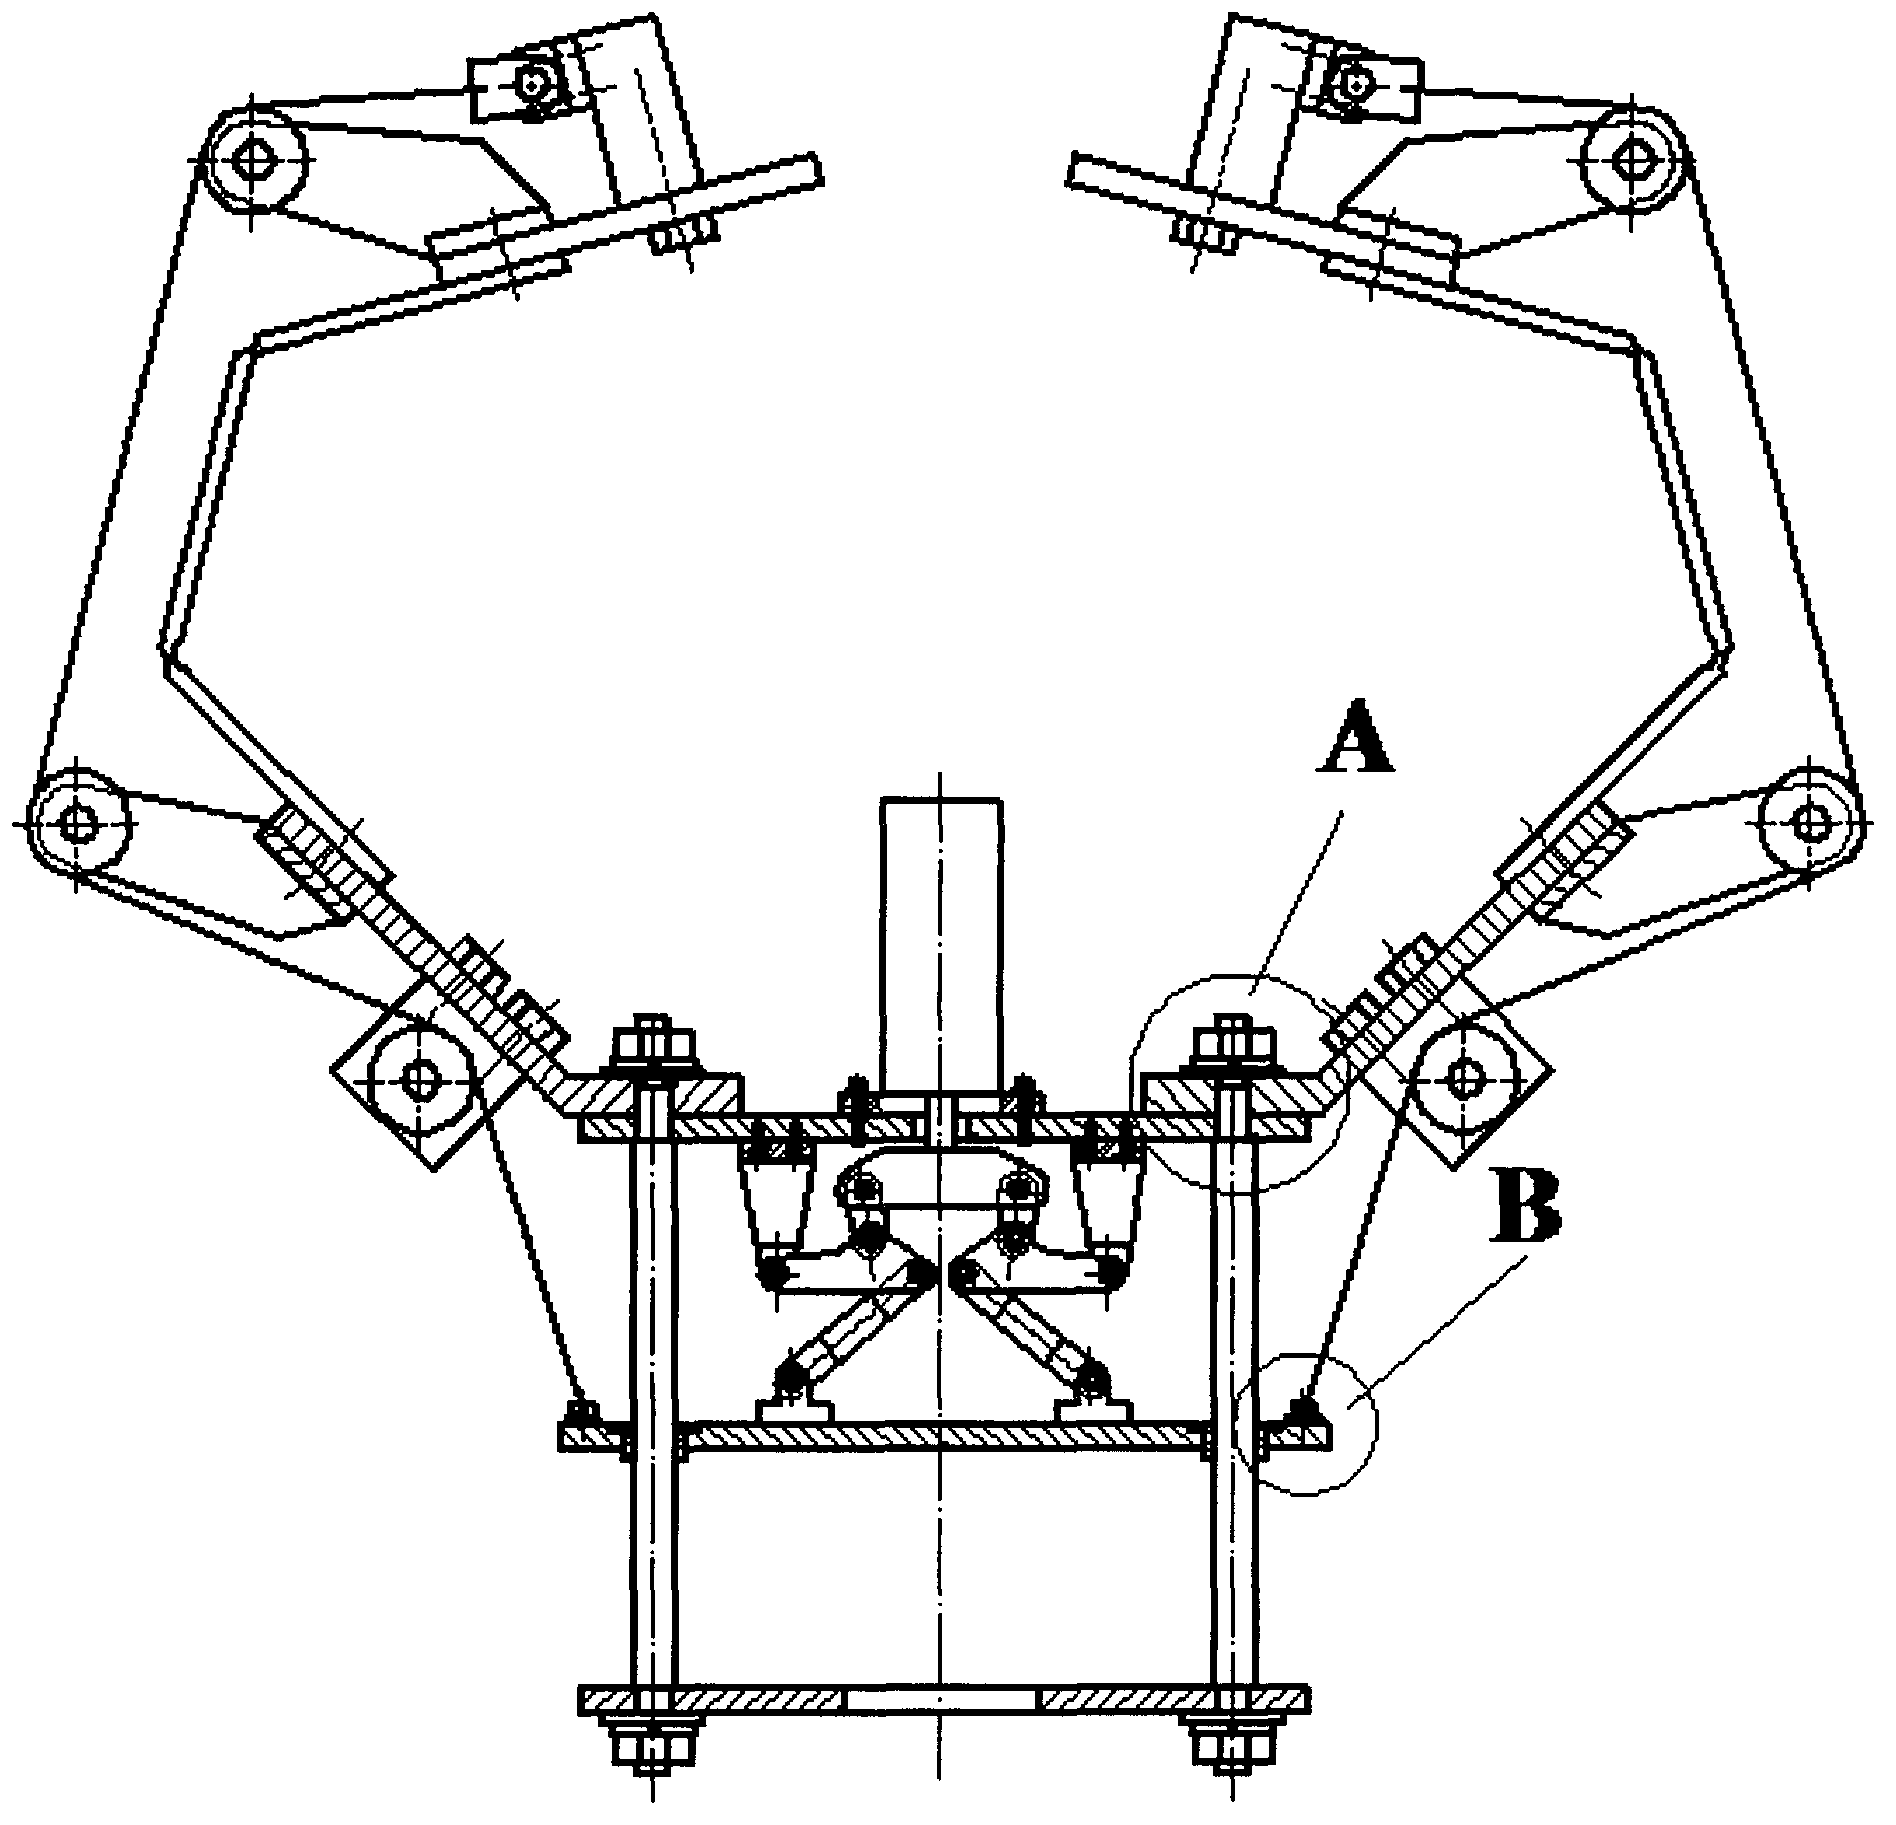 Flexible passive catcher with serial bent flexible hinge framework tracked by pneumatic rope